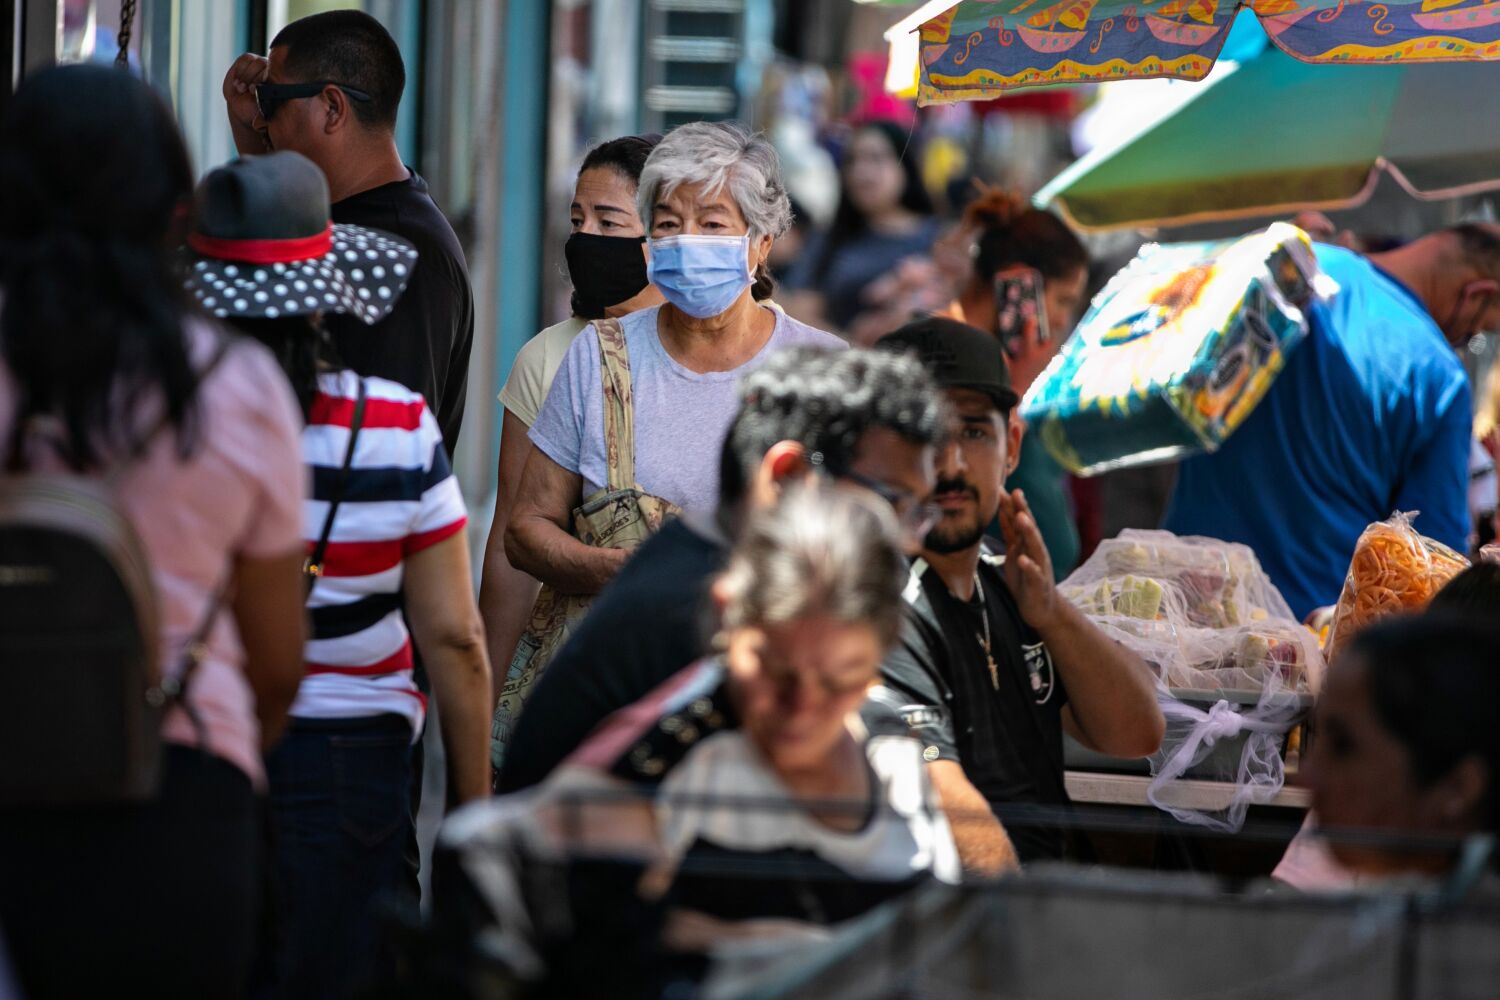 'The pandemic is over,' some declare. It again misses larger point of COVID-19, experts say